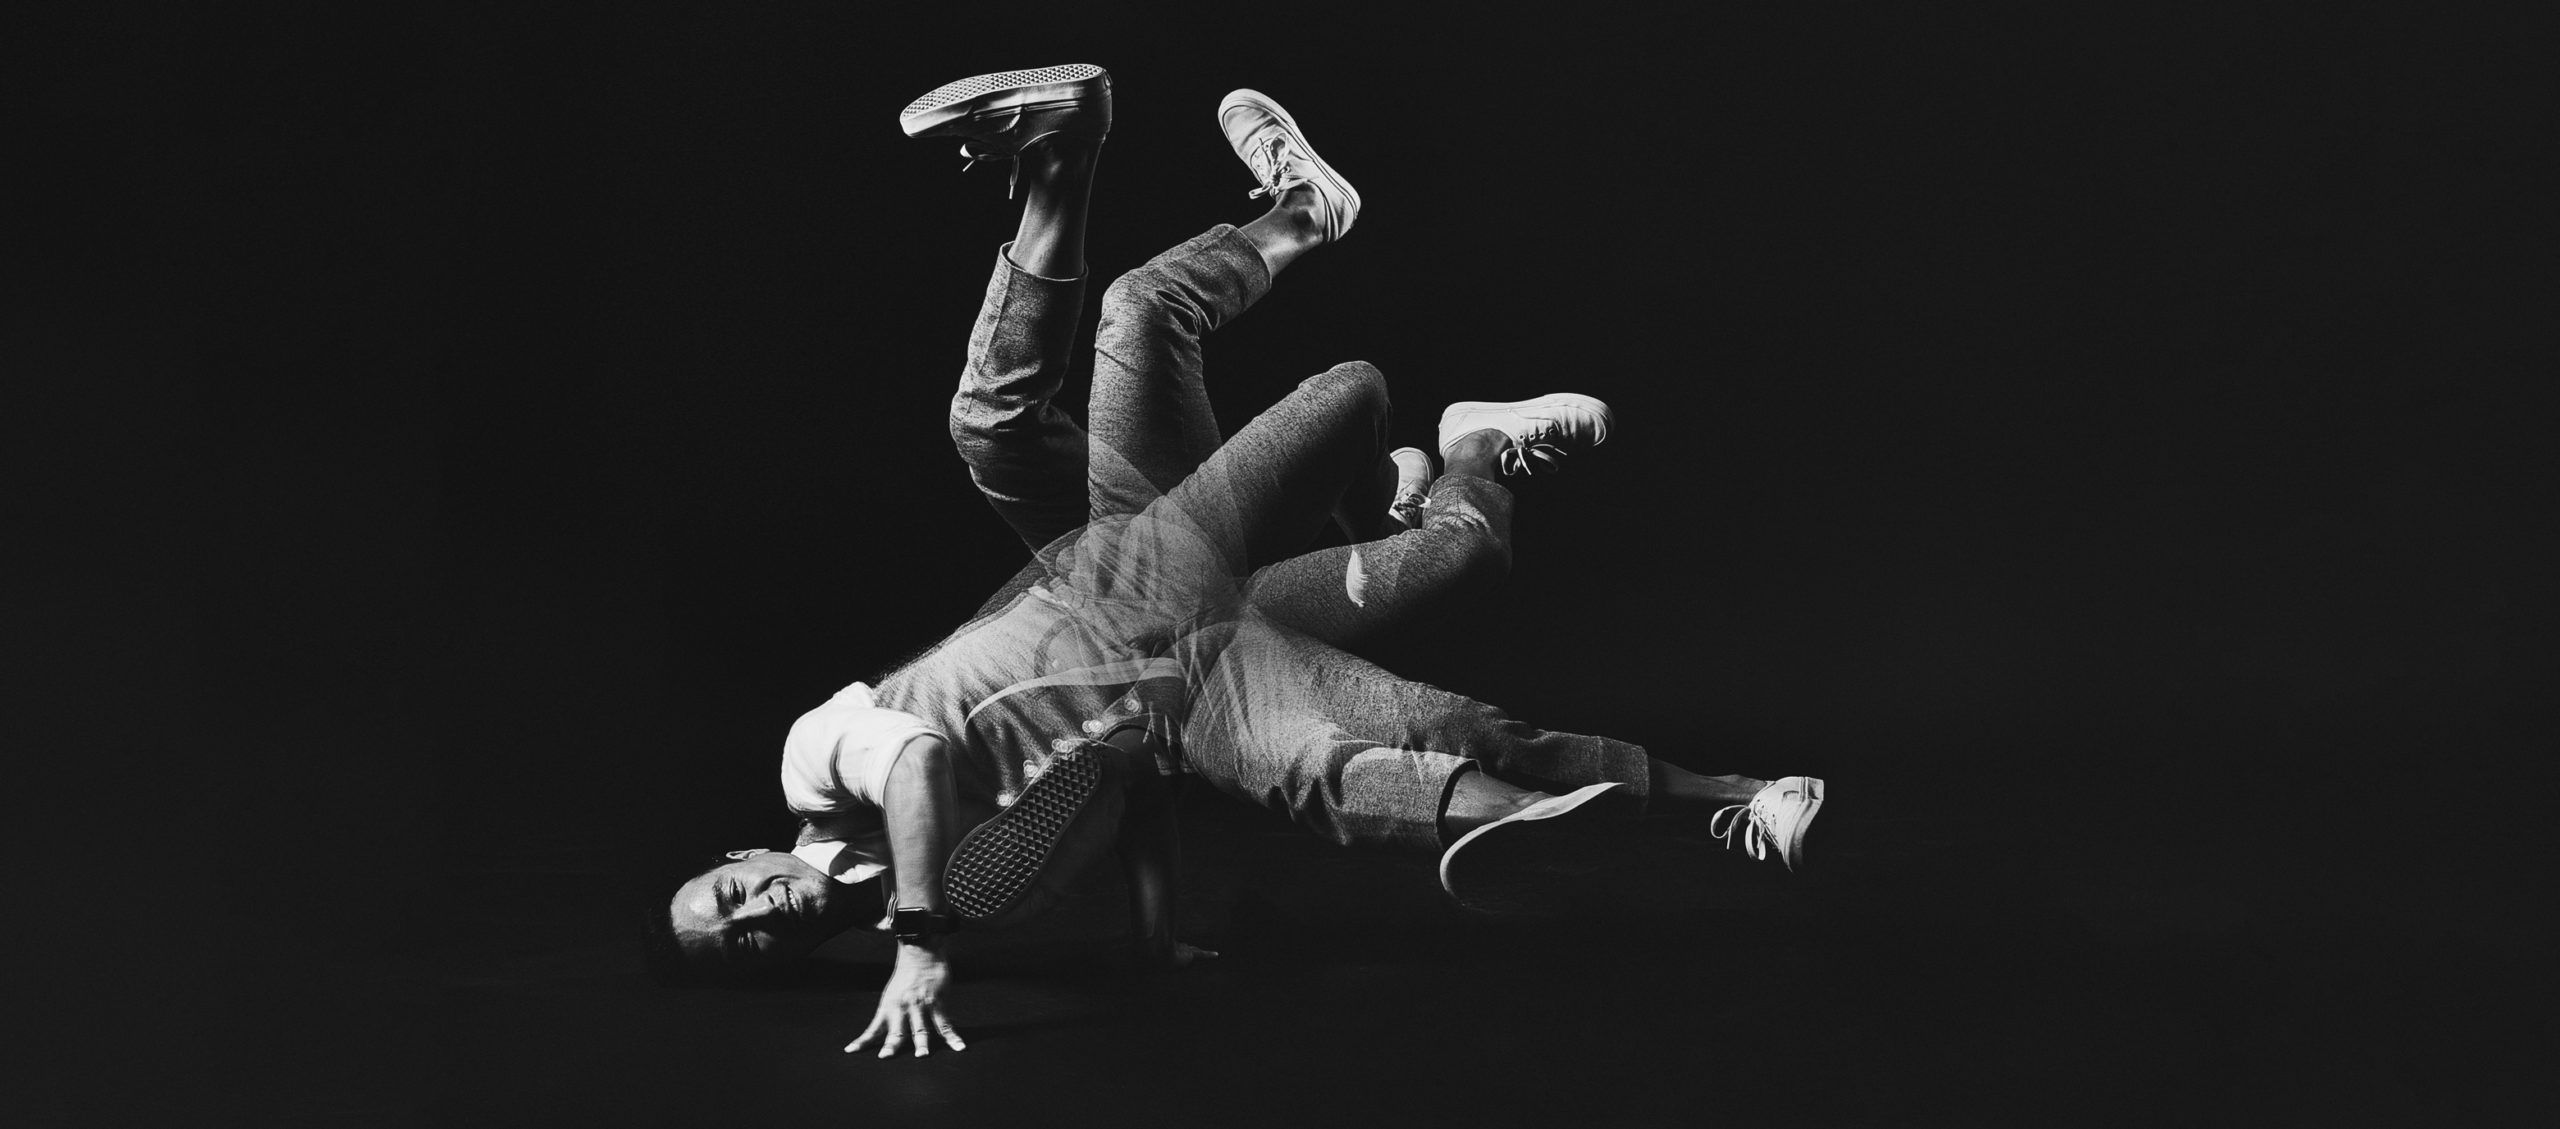 Breakdancing: David Yi, Corporate lawyer and an accomplished breakdancer. 2560x1130 Dual Screen Wallpaper.